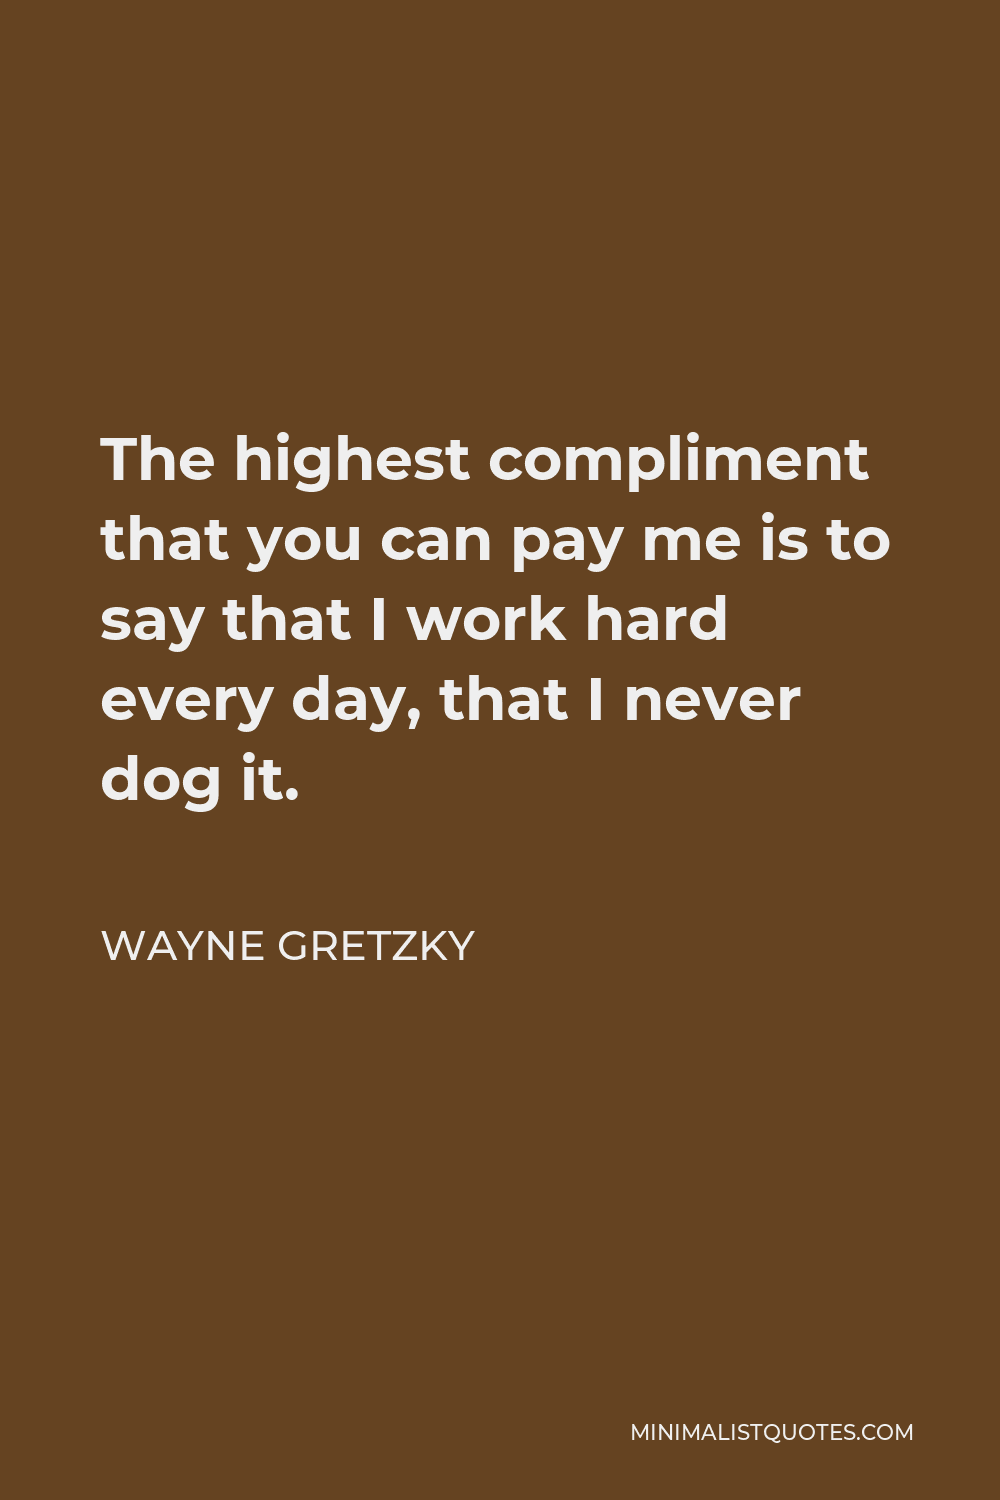 Wayne Gretzky Quote - The highest compliment that you can pay me is to say that I work hard every day, that I never dog it.